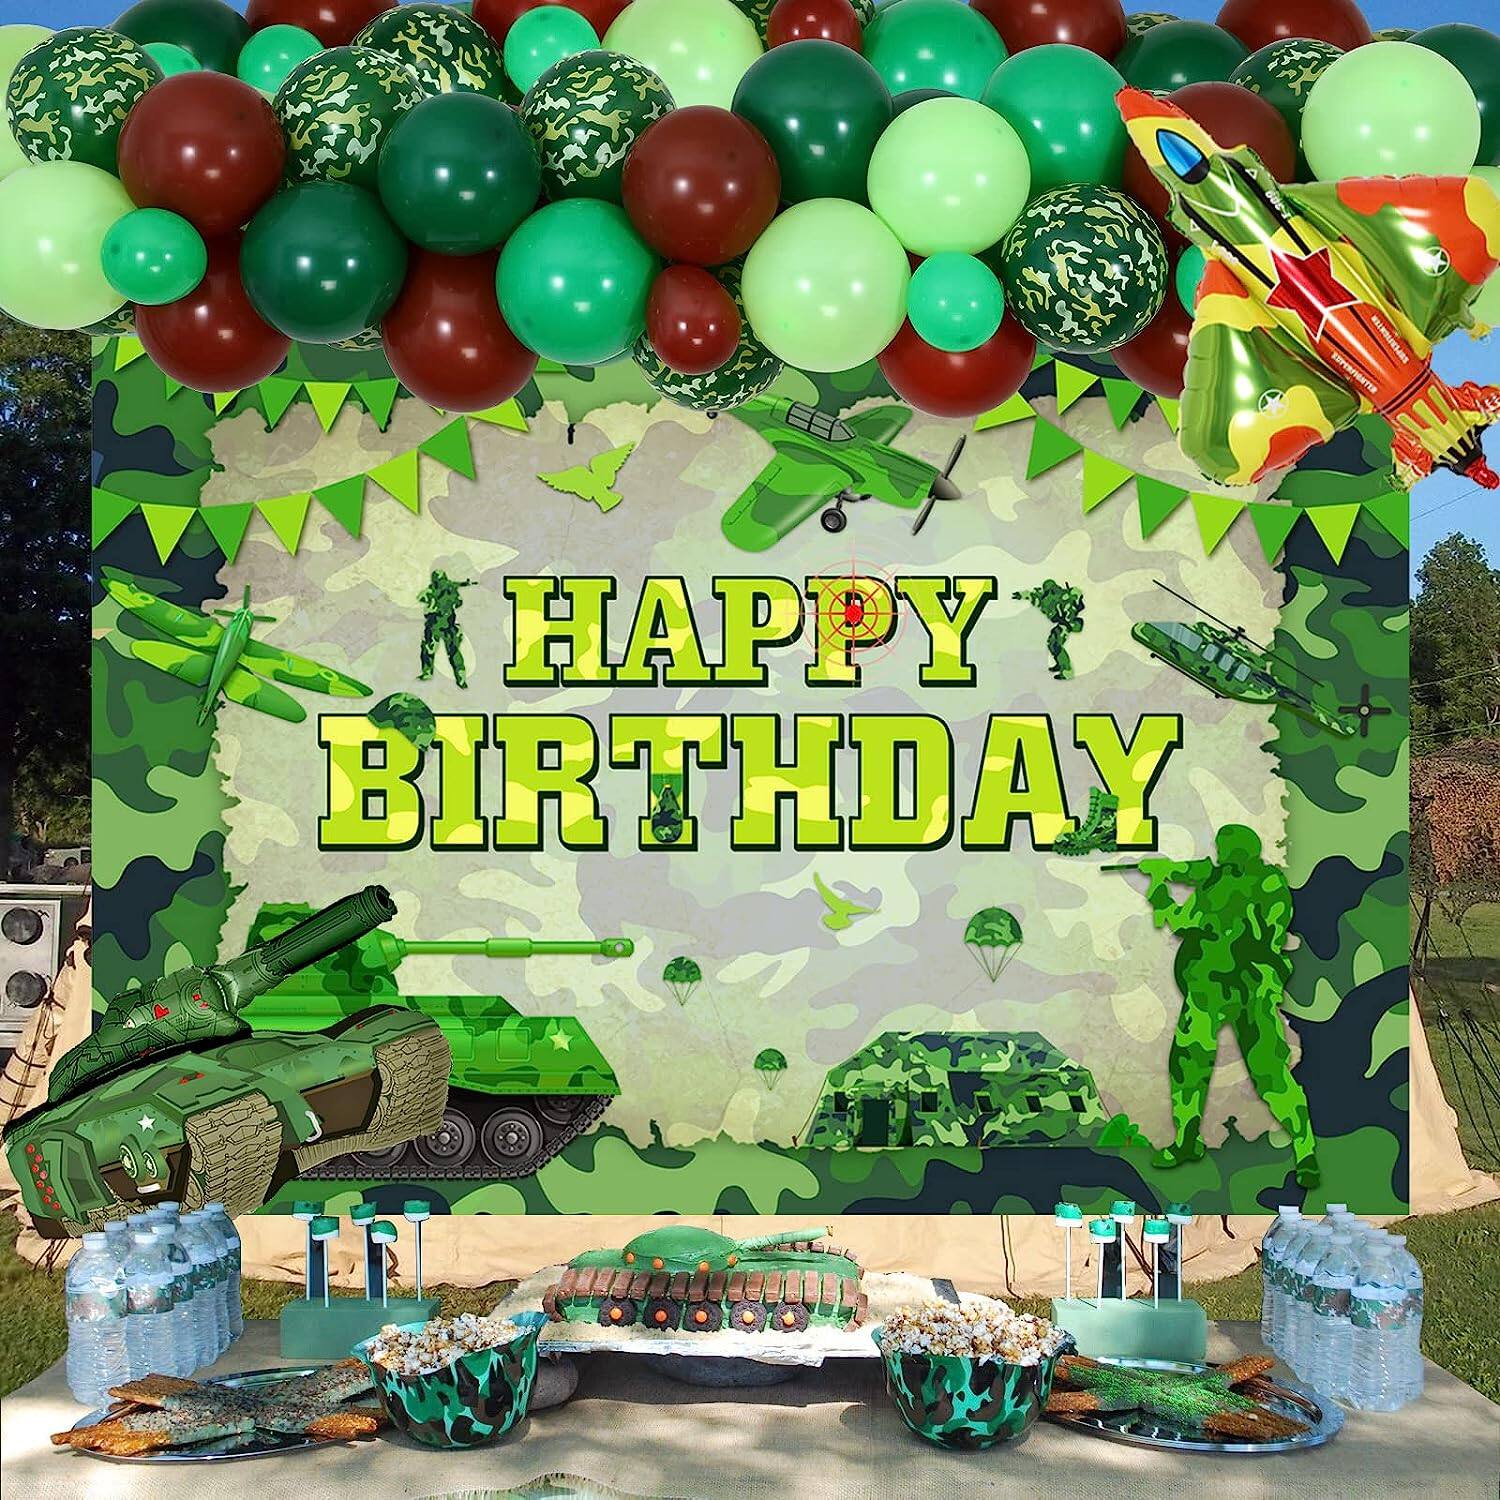 Camouflage Balloon Arch for Army Birthday Party Decorations, Green Brown  Balloon Garland Kit for Military Camo Army Theme Party, Camo Balloon Arch  for